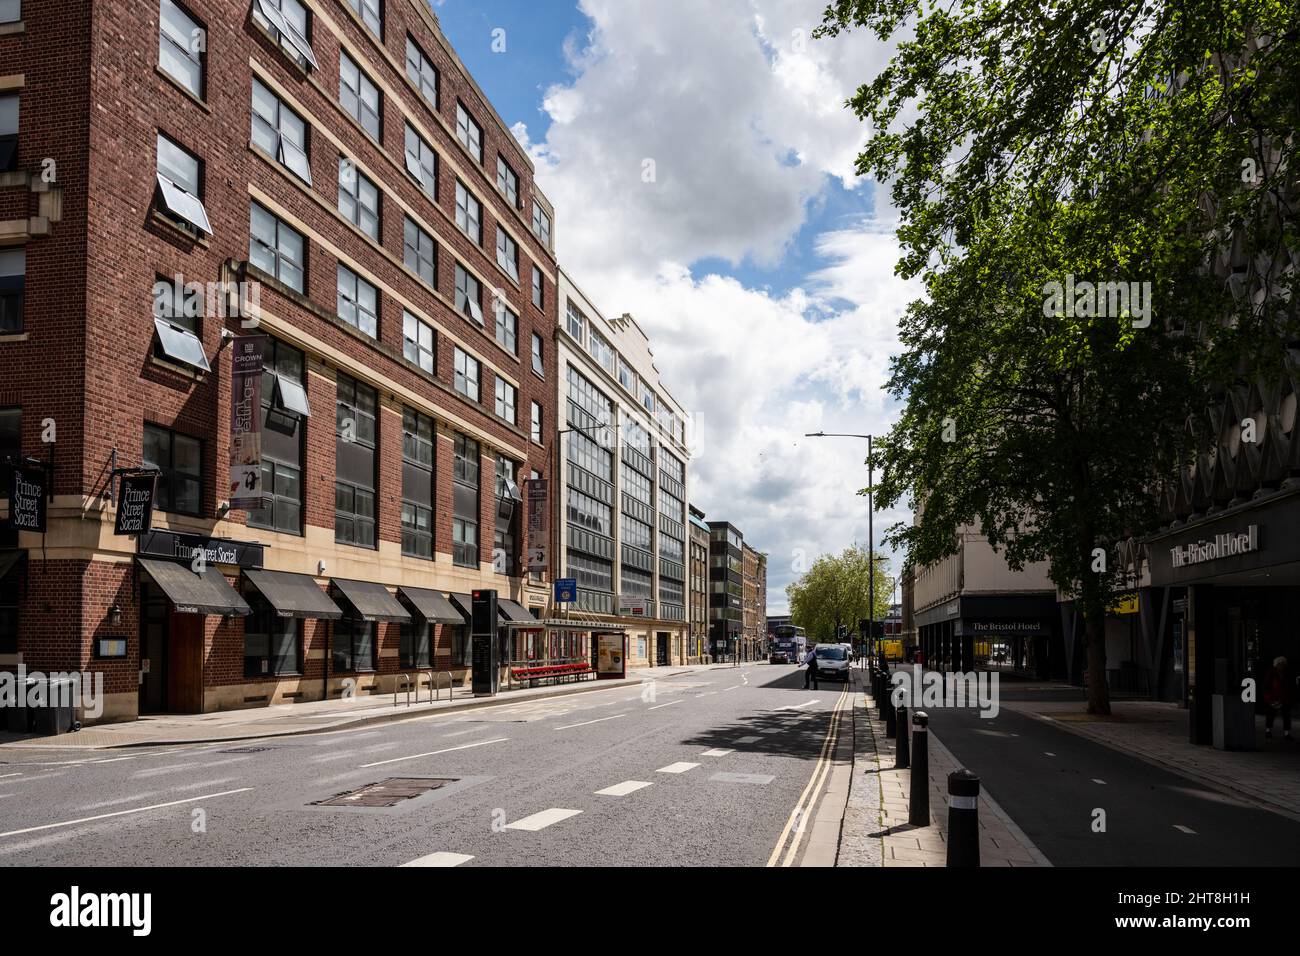 Refurbished 20th century office buildings and warehouses line Princes Street in central Bristol. Stock Photo